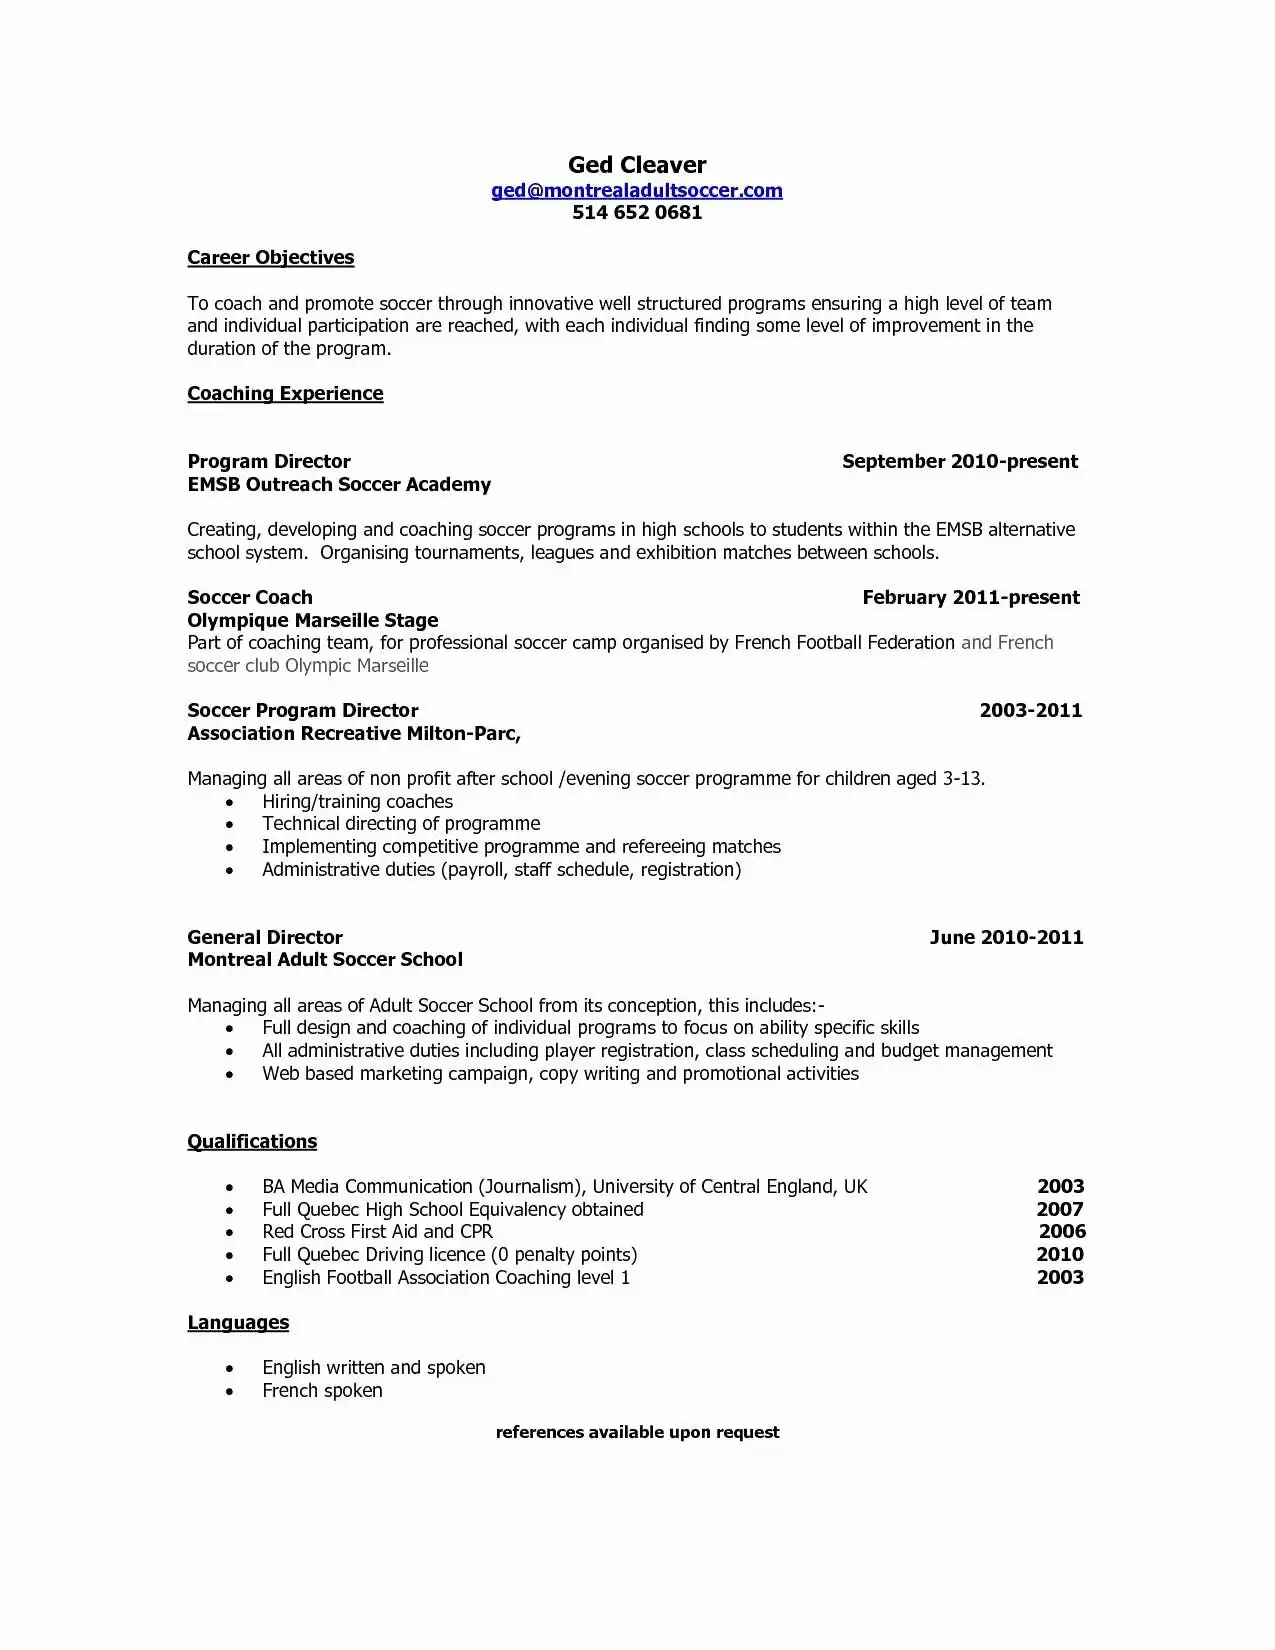 how to put ged on resume